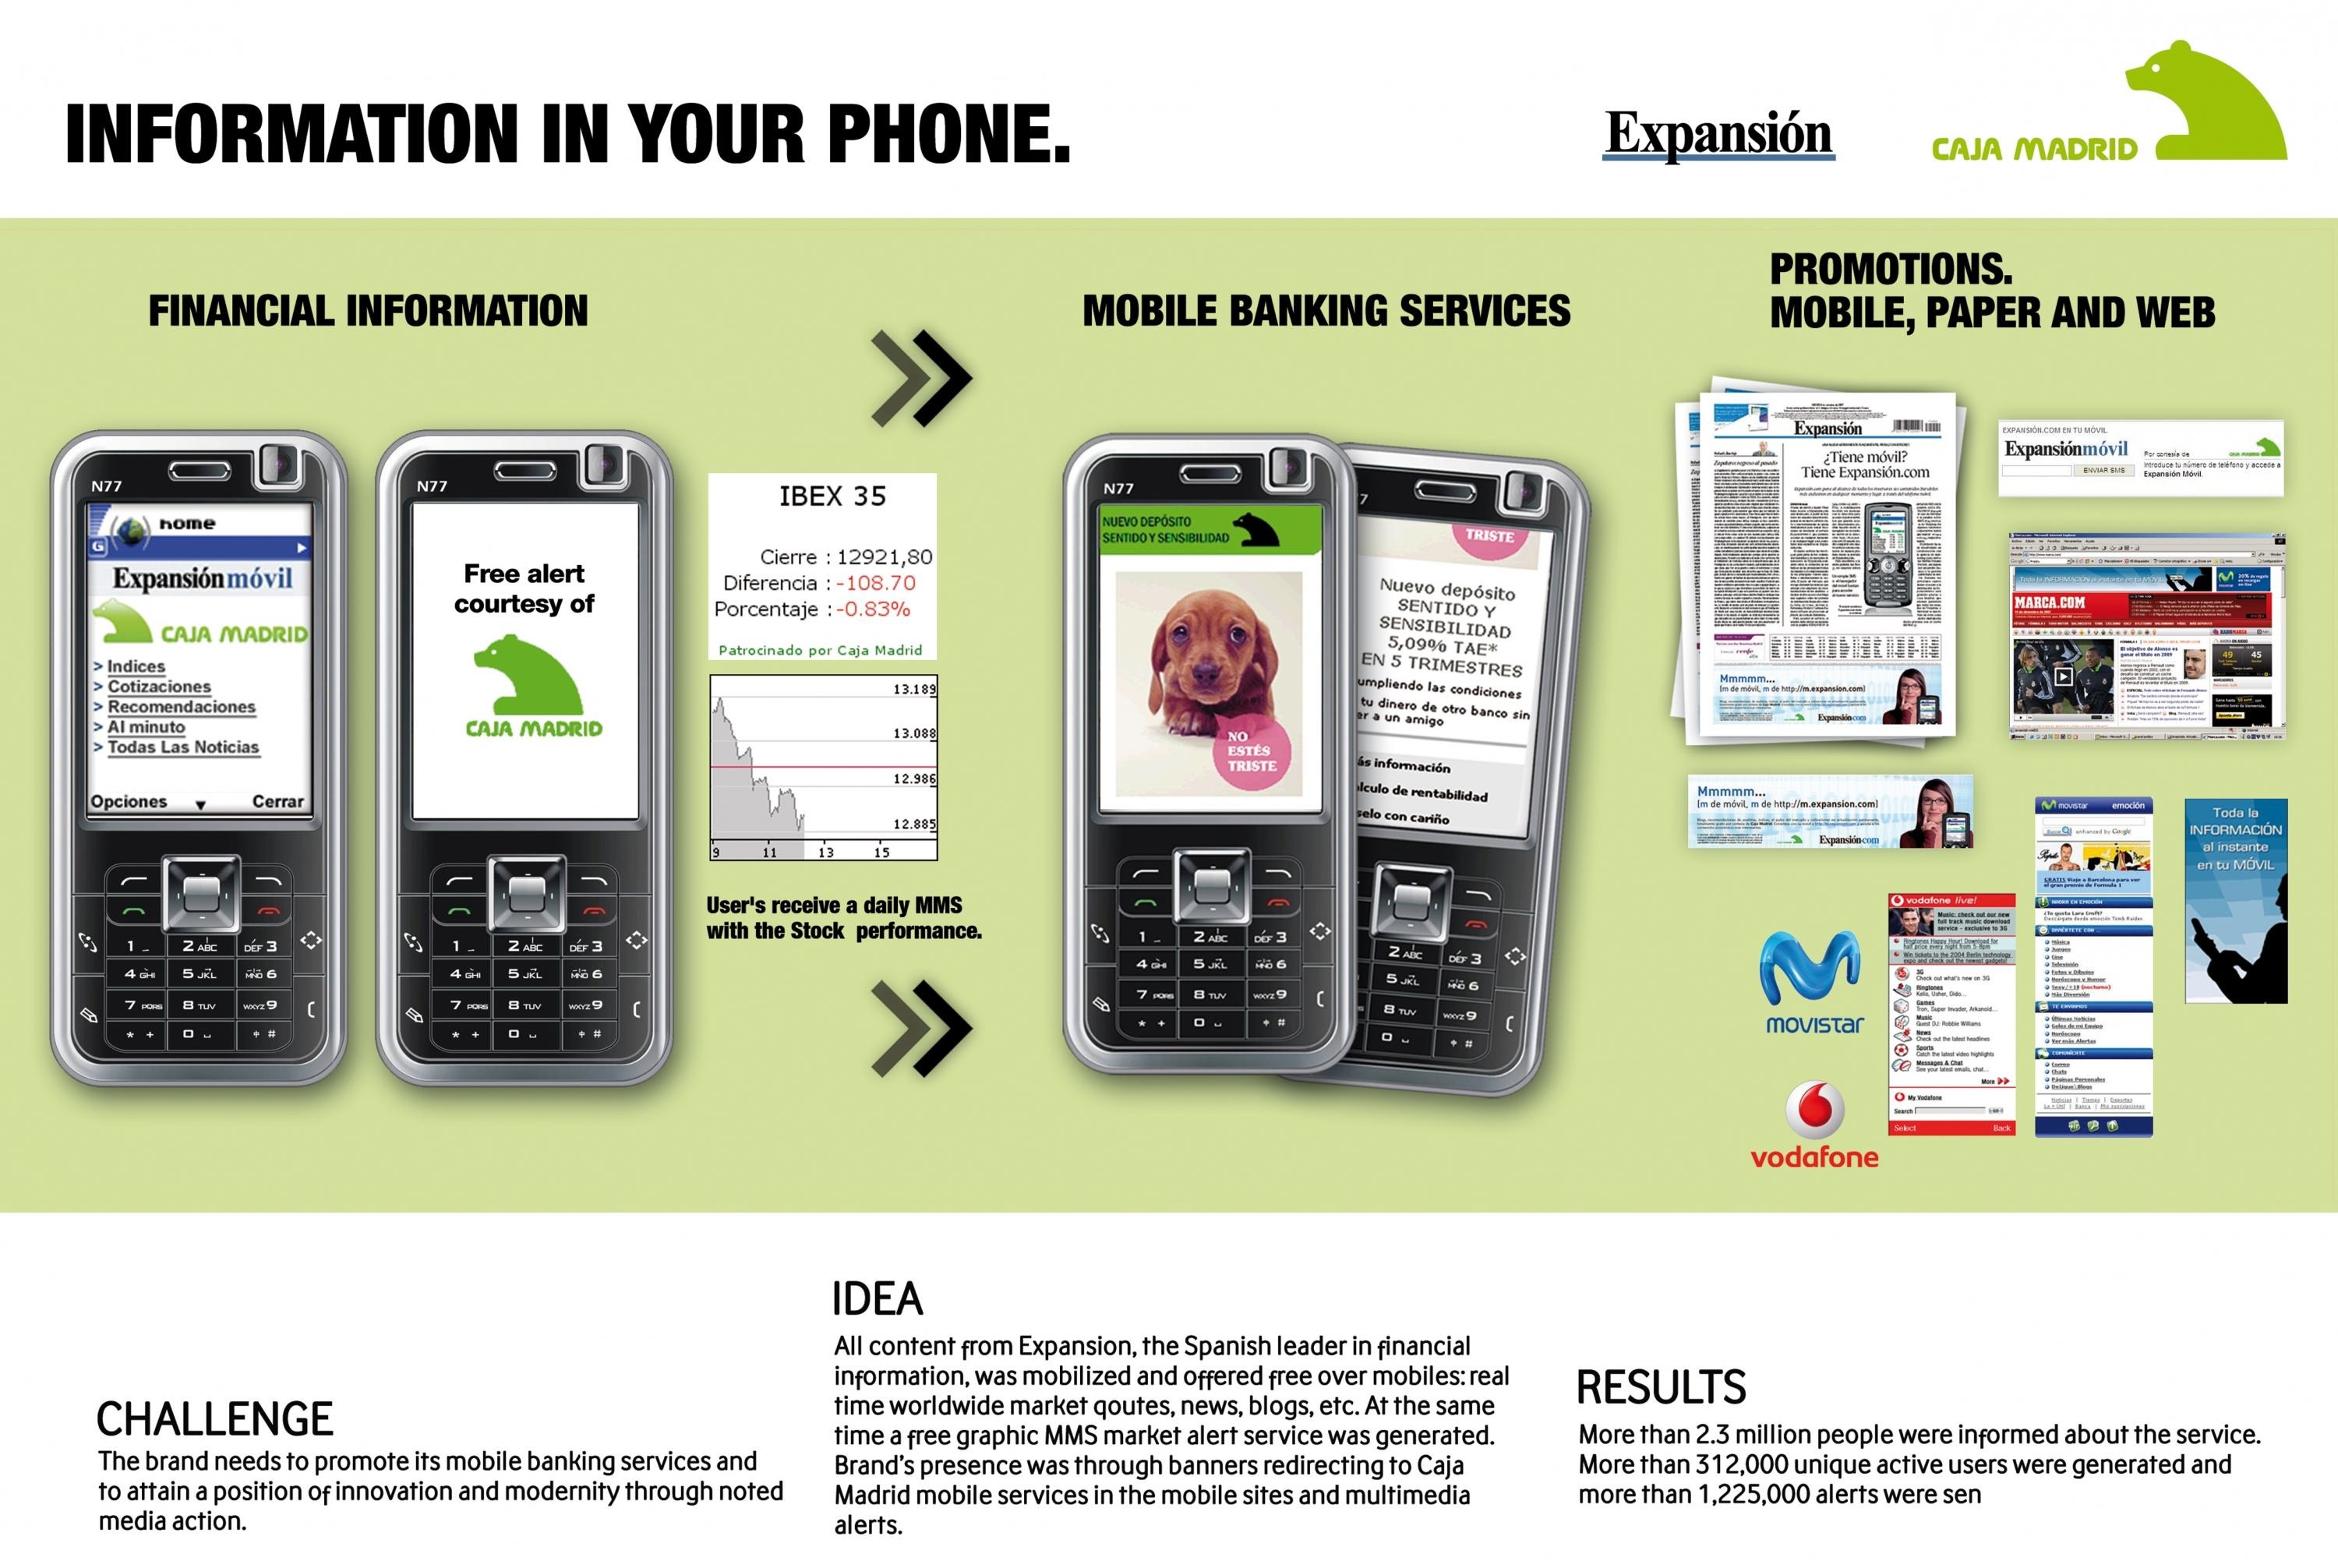 BANKING MOBILE SERVICES